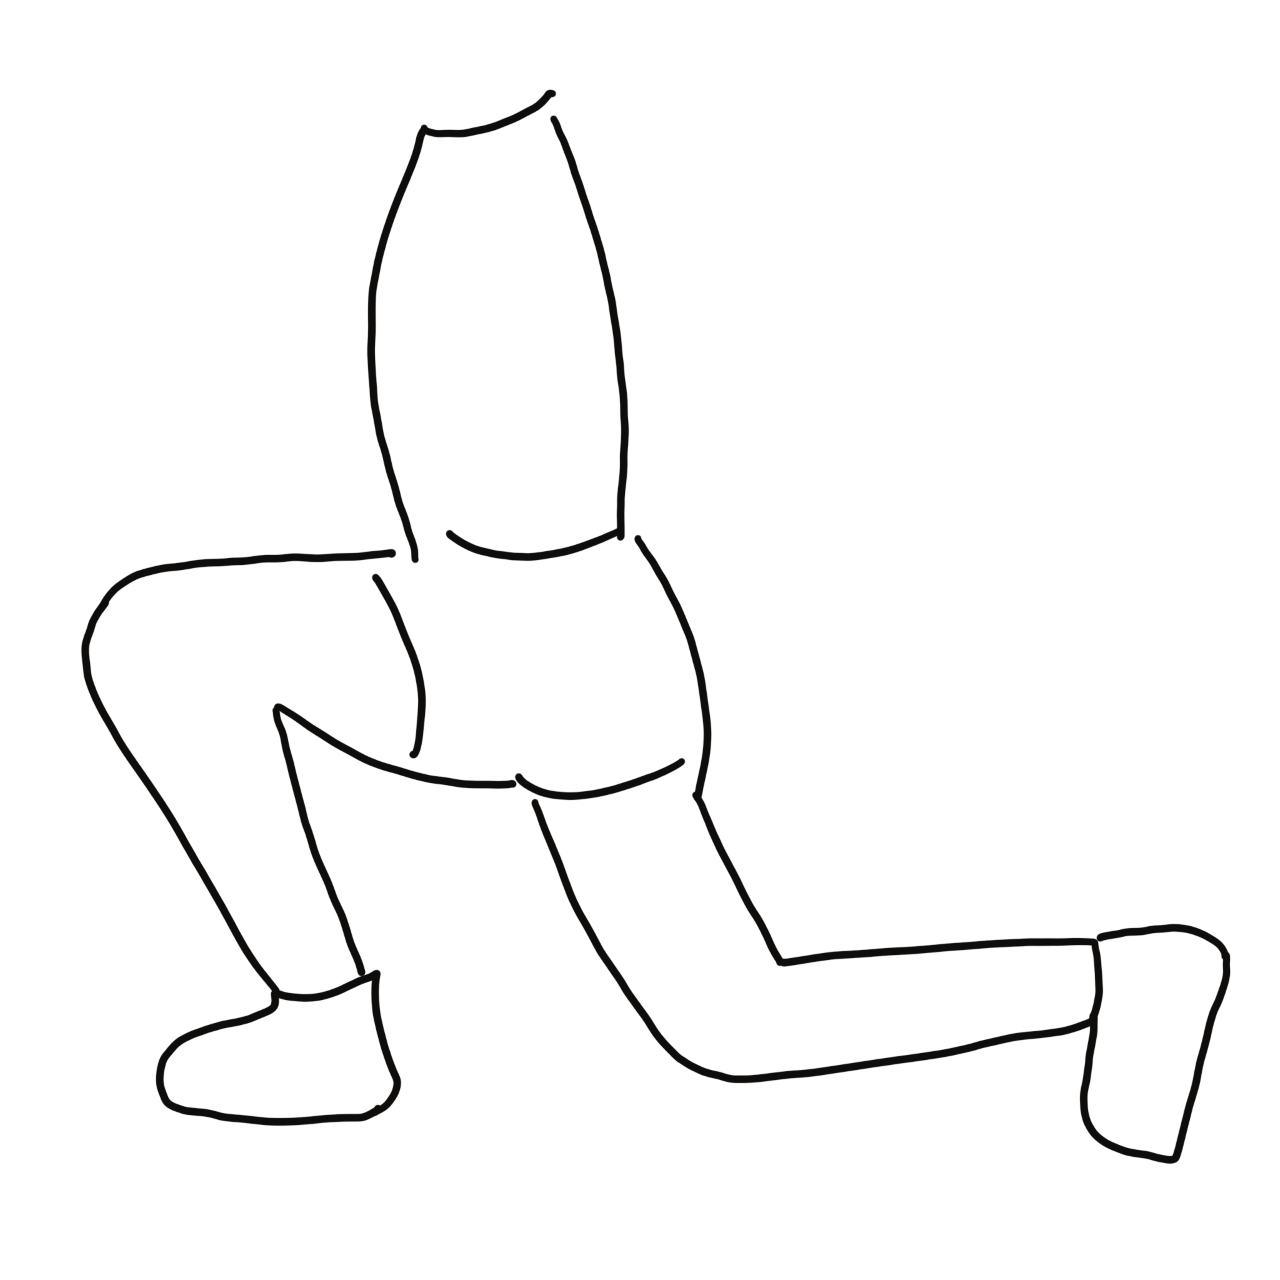 The figure shows an incorrect lunge.